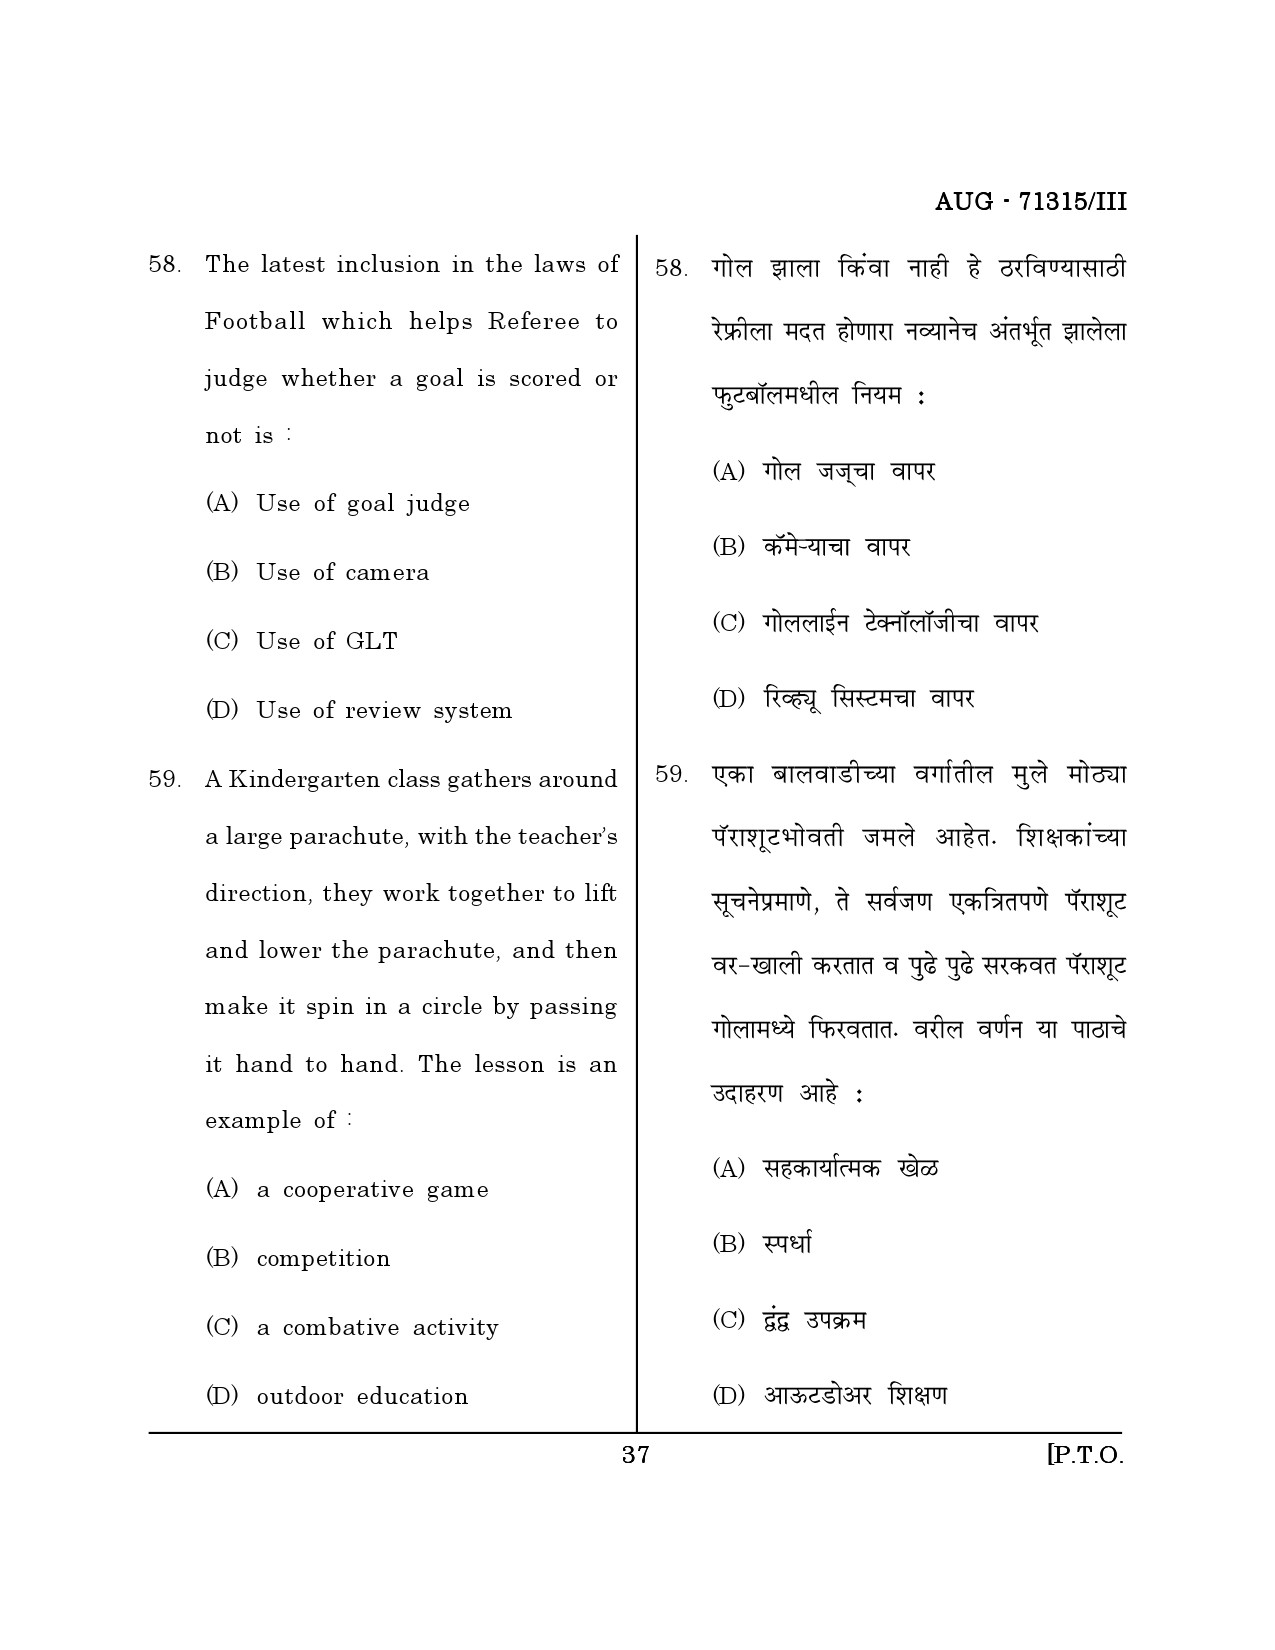 Maharashtra SET Physical Education Question Paper III August 2015 36